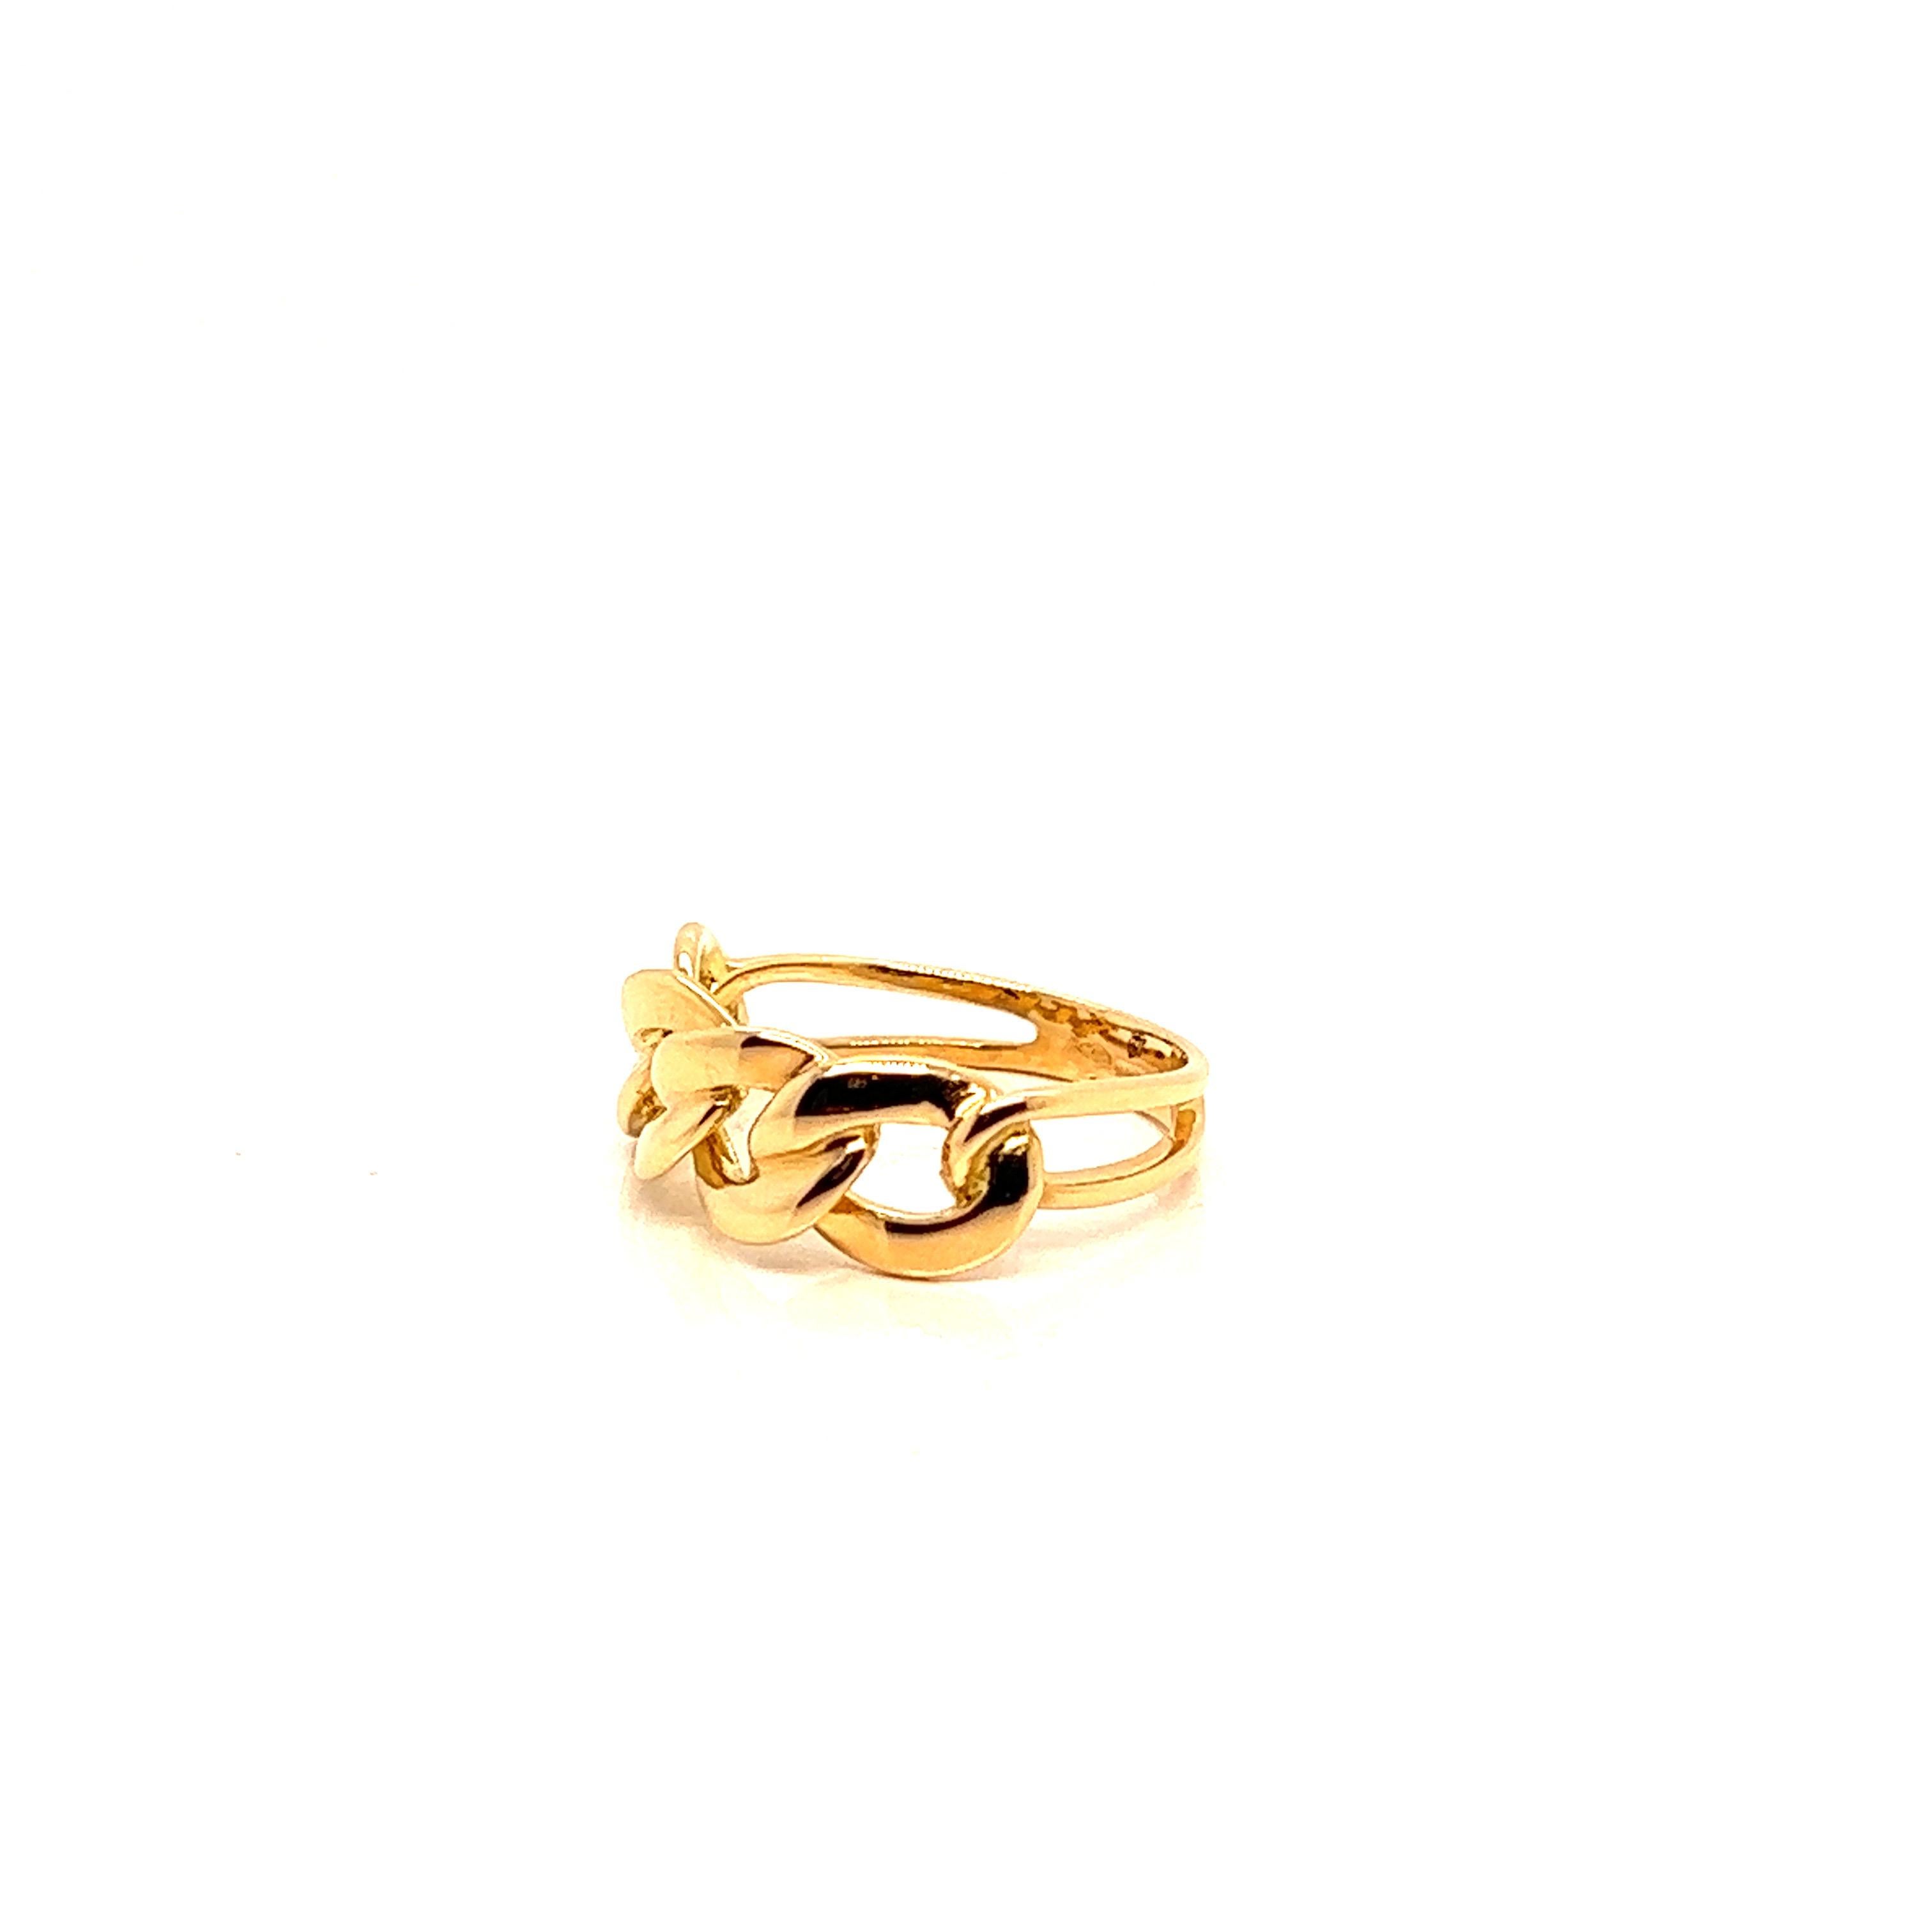 French Ring 4 Small Braided Rings Yellow Gold 18 Karat For Sale 4